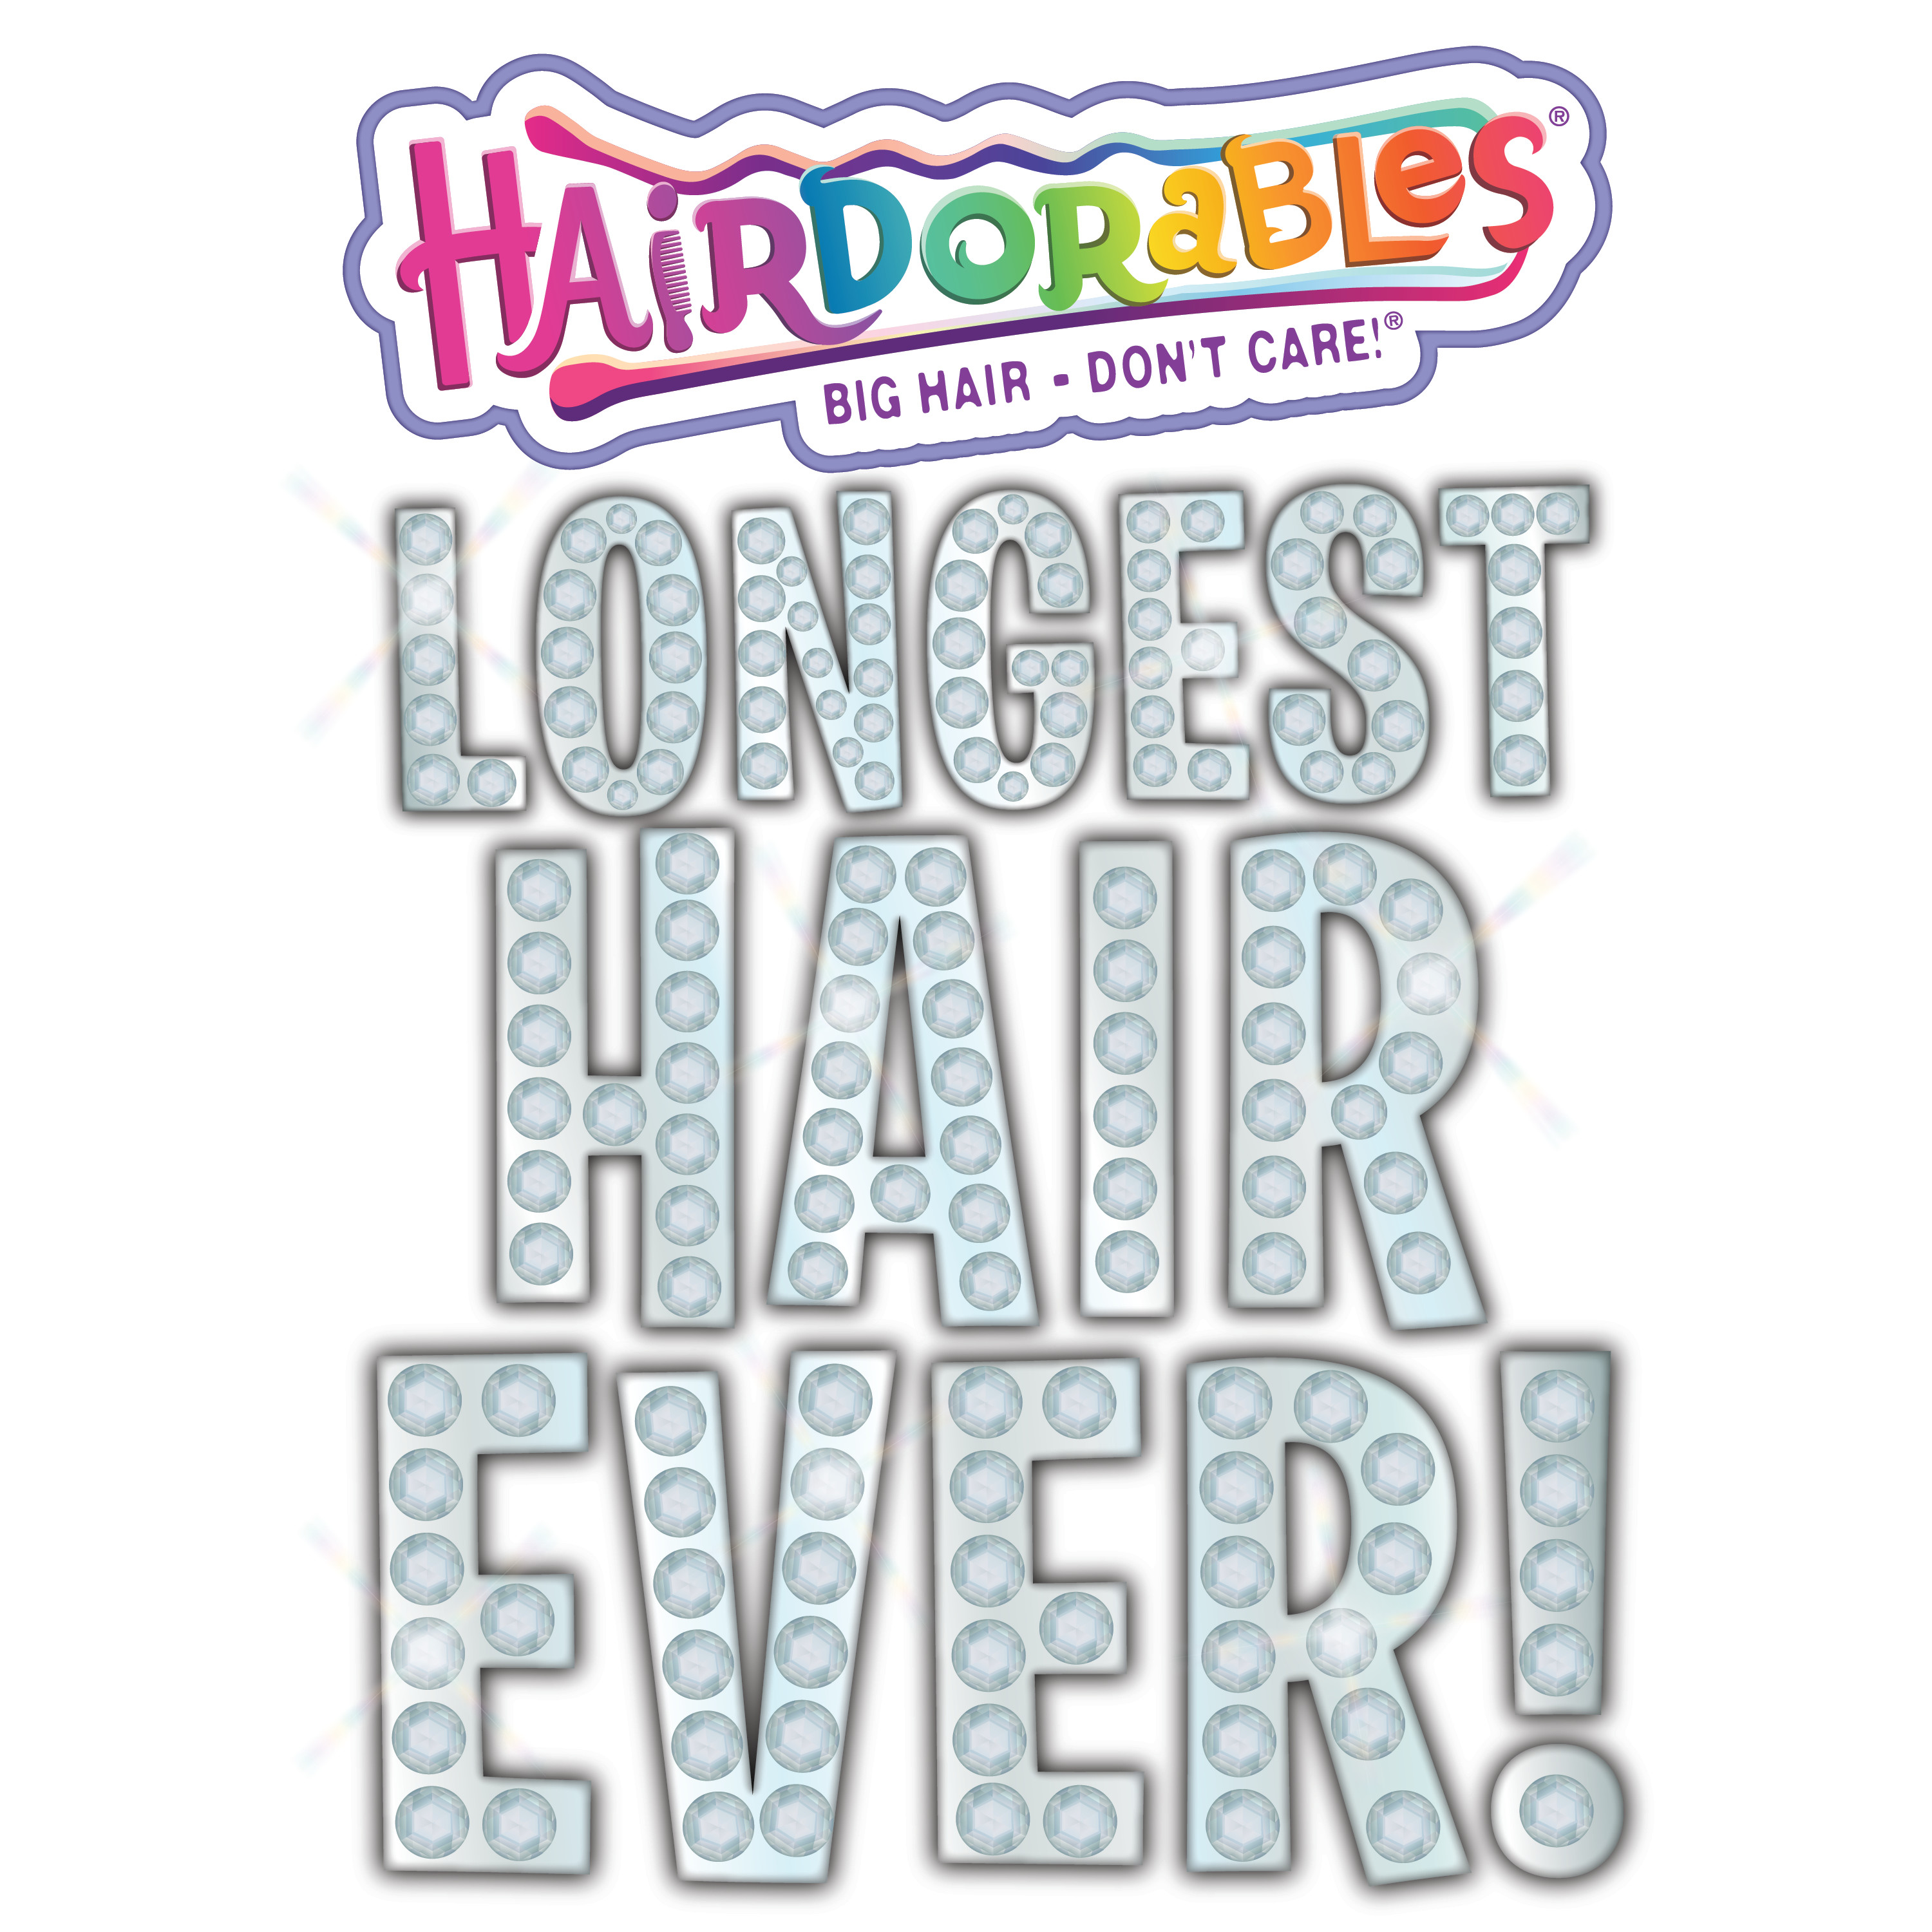 Hairdorables Longest Hair Ever! Kali, Includes 8 Surprises, 10-Inches of Hair to Style, Purple,  Kids Toys for Ages 3 Up, Gifts and Presents - image 5 of 8